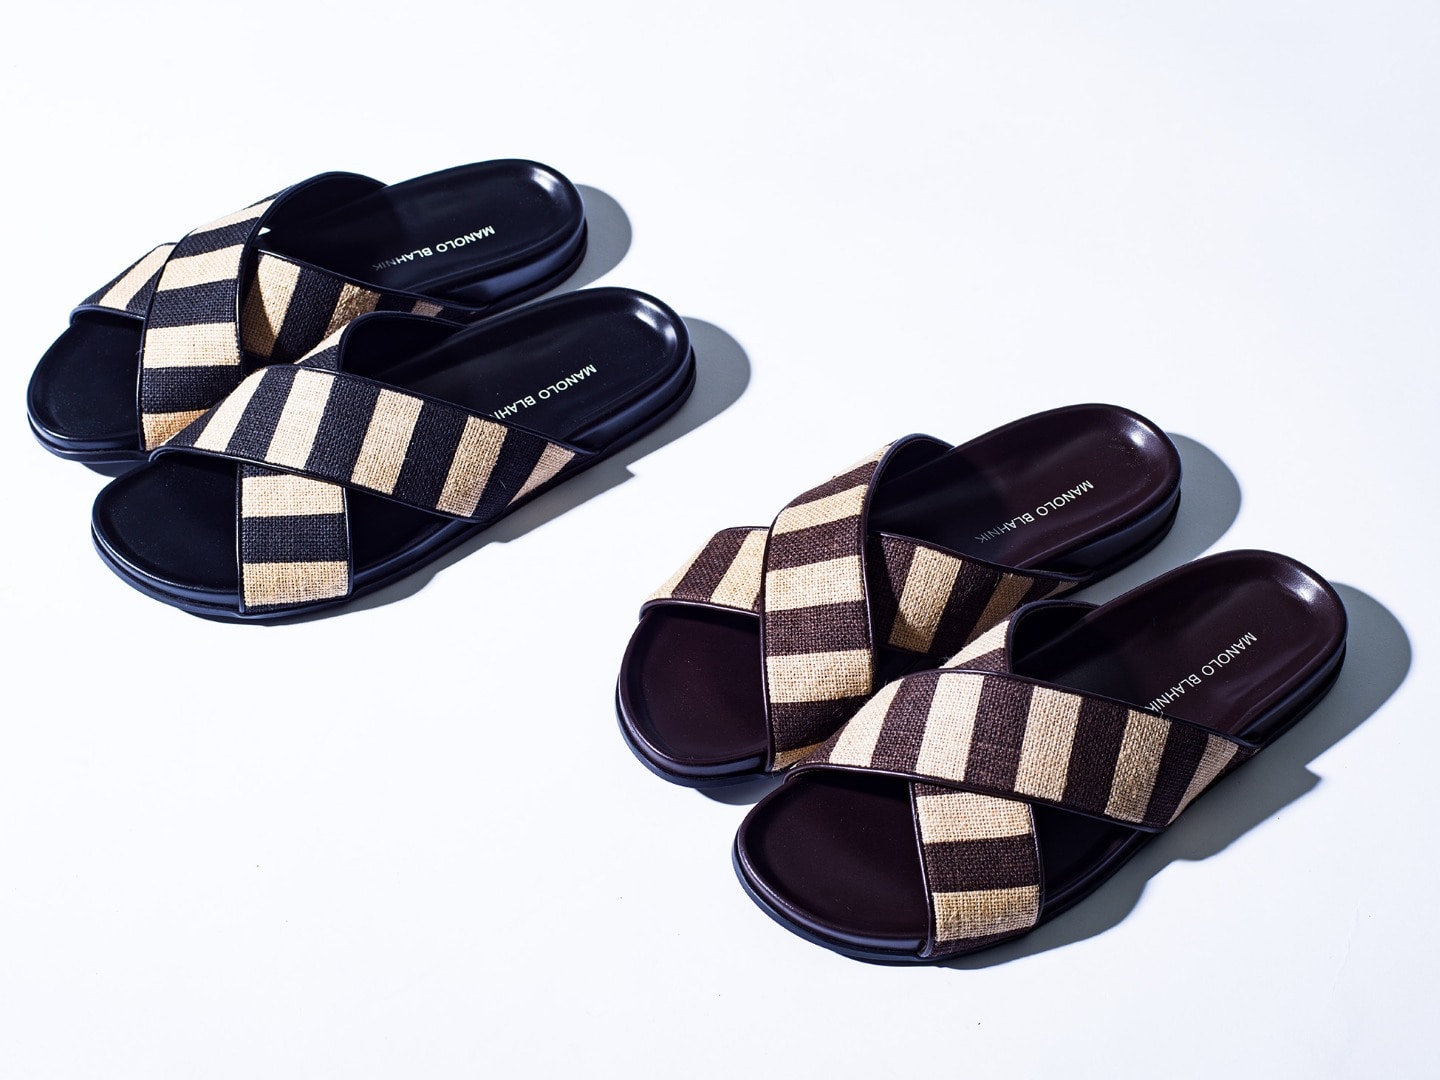 MANOLO BLHANIK Exclusive Sandal CHILTERN 4.29(Fri) New Arrival 